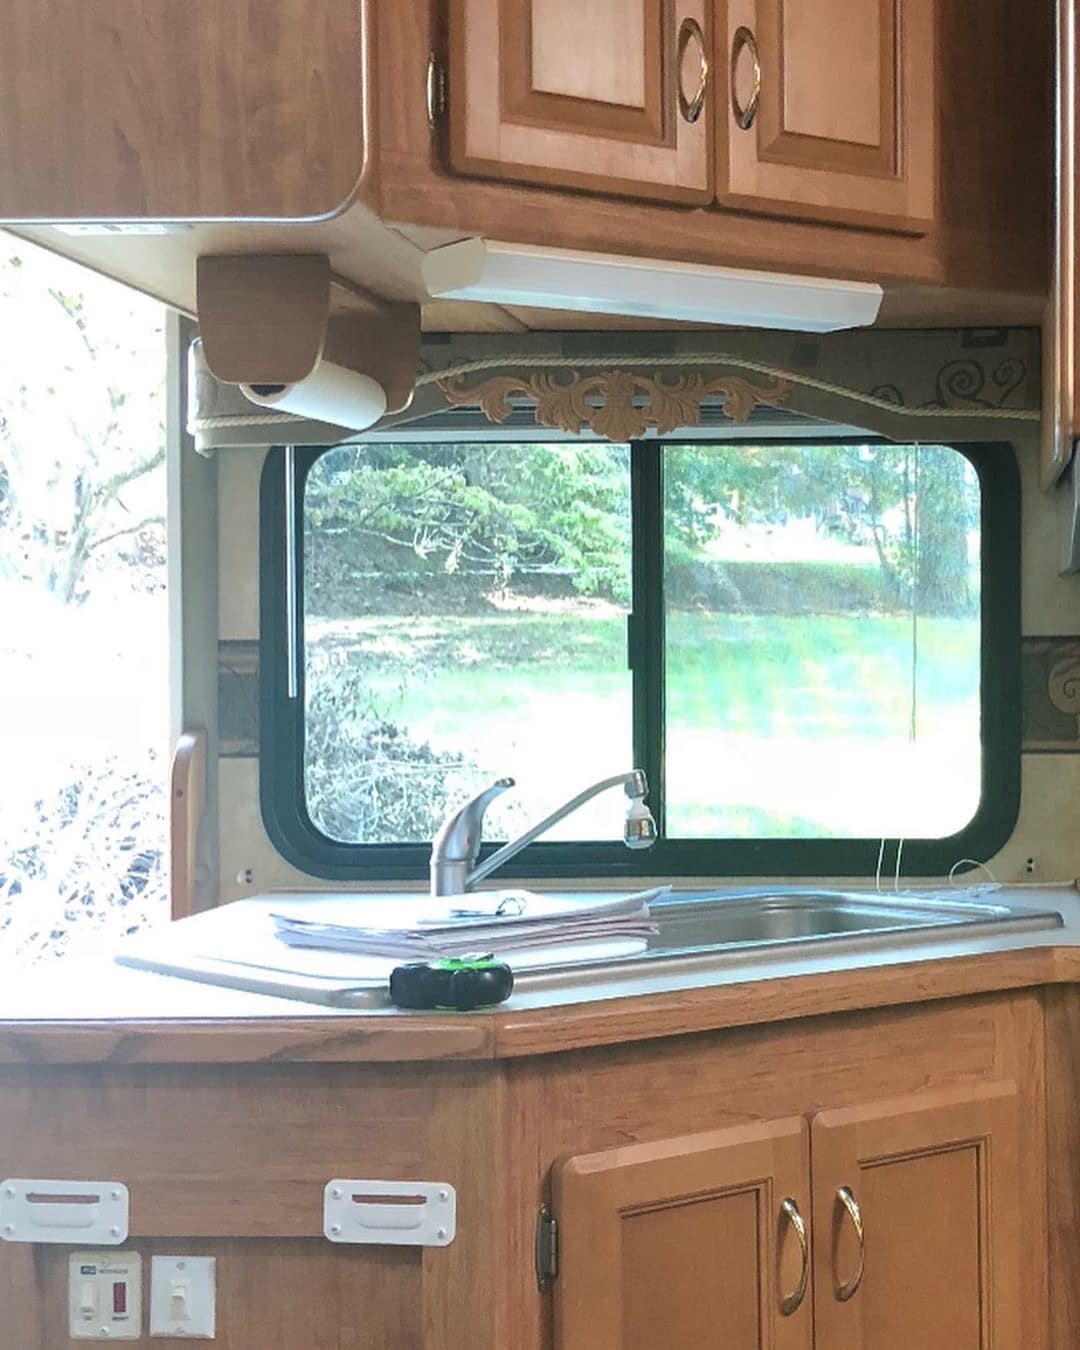 IMG 3313 1 Calling all nomads! Tiny RV living is the newest trend popping up around Birmingham. Ashley Gann, the Magic City's only female chief meteorologist, is already on board!